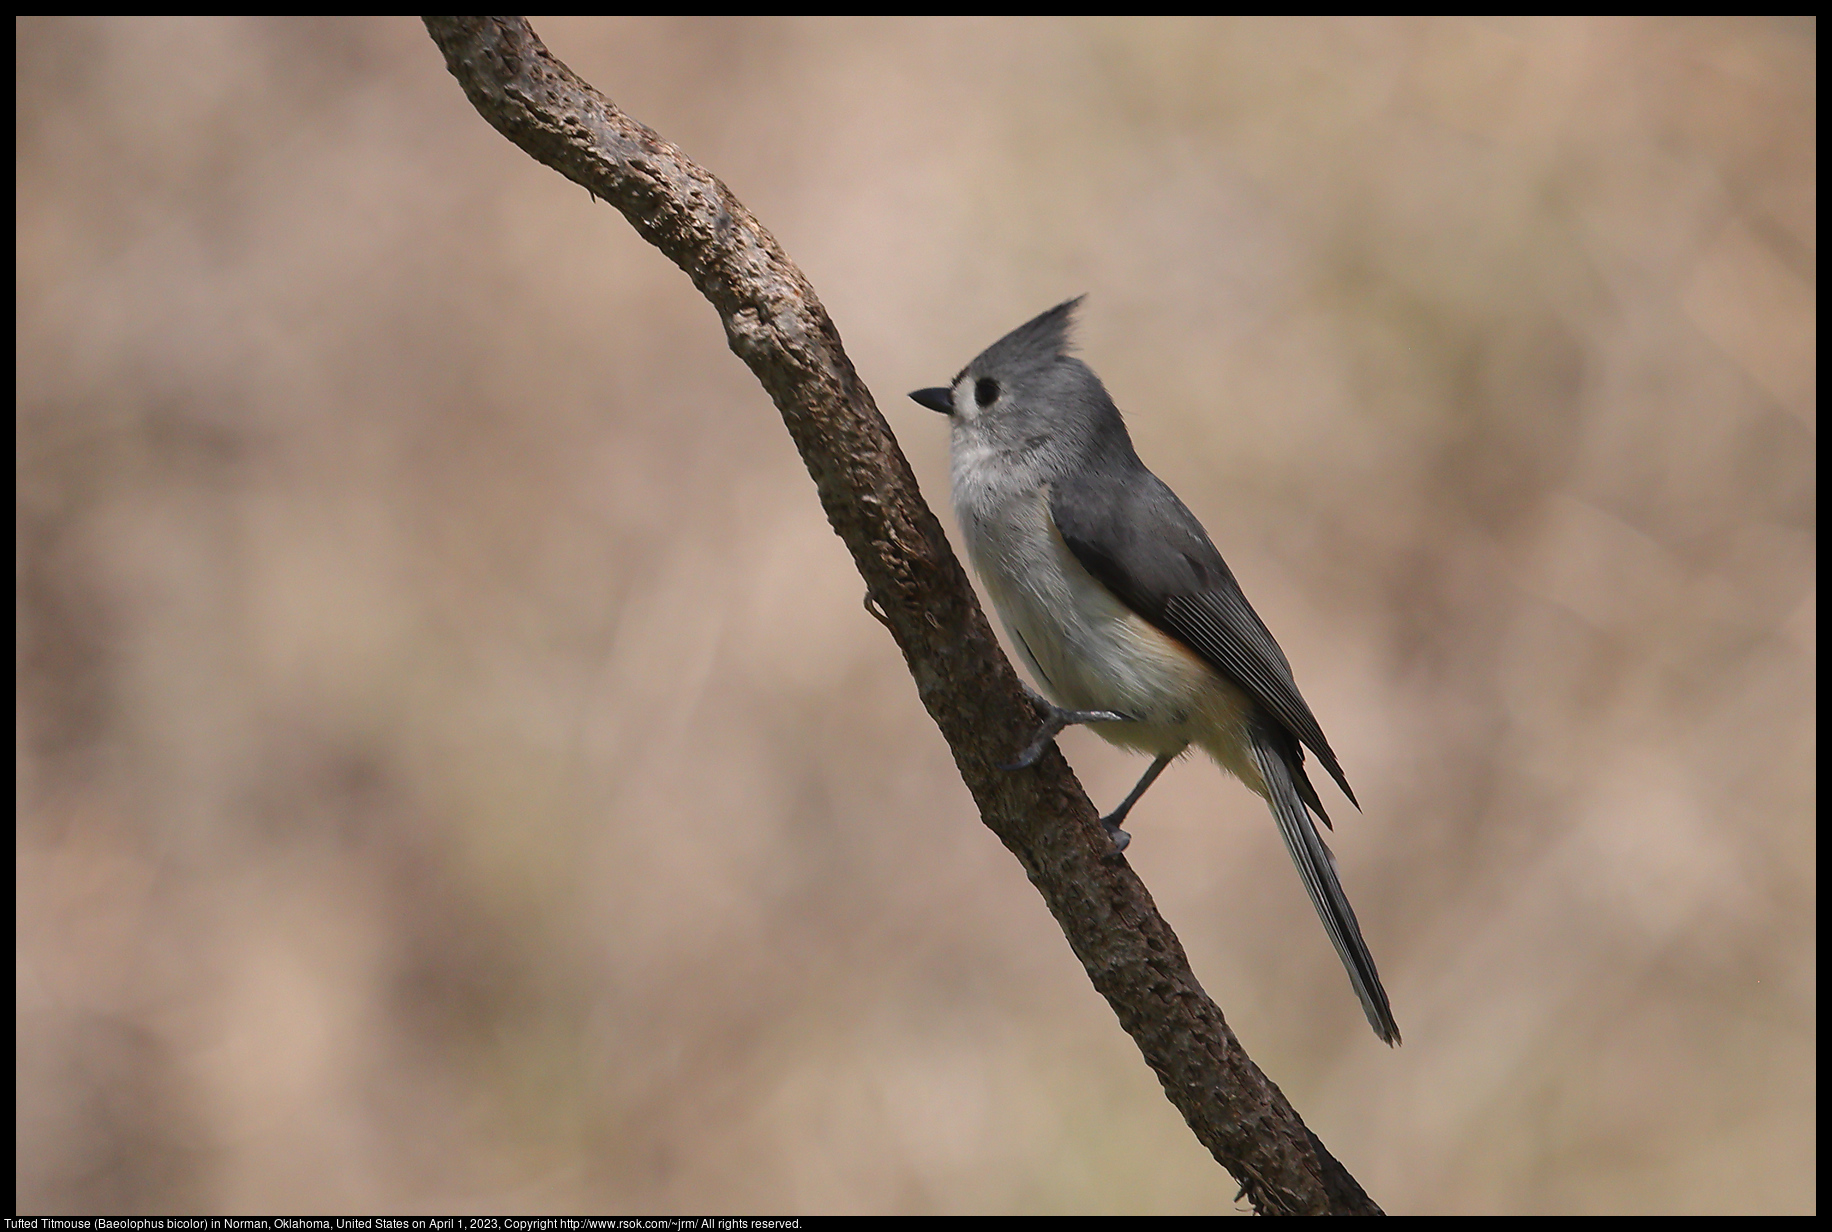 Tufted Titmouse (Baeolophus bicolor) in Norman, Oklahoma, United States on April 1, 2023